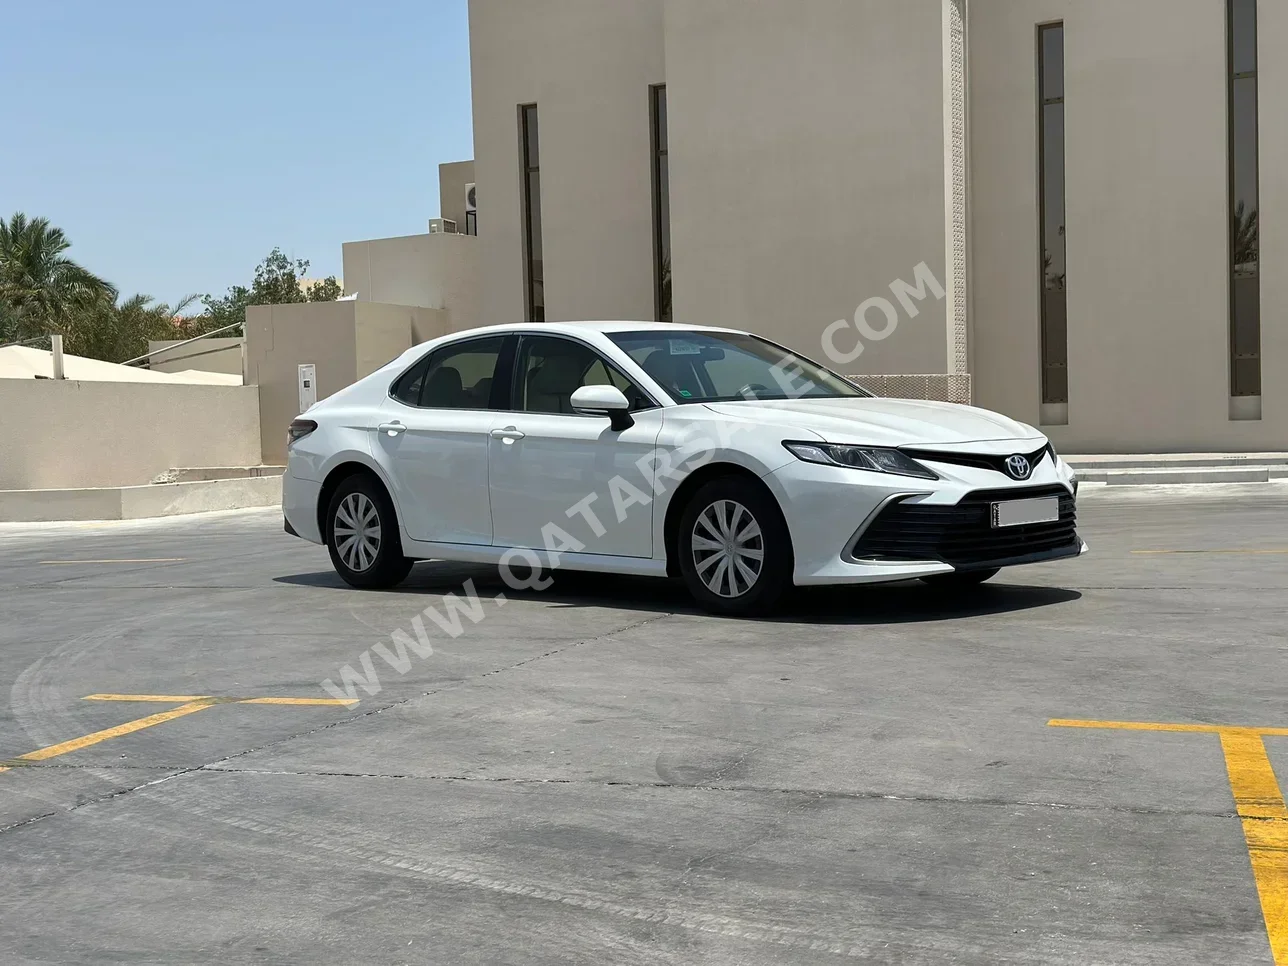 Toyota  Camry  LE  2022  Automatic  32,000 Km  4 Cylinder  Front Wheel Drive (FWD)  Sedan  White